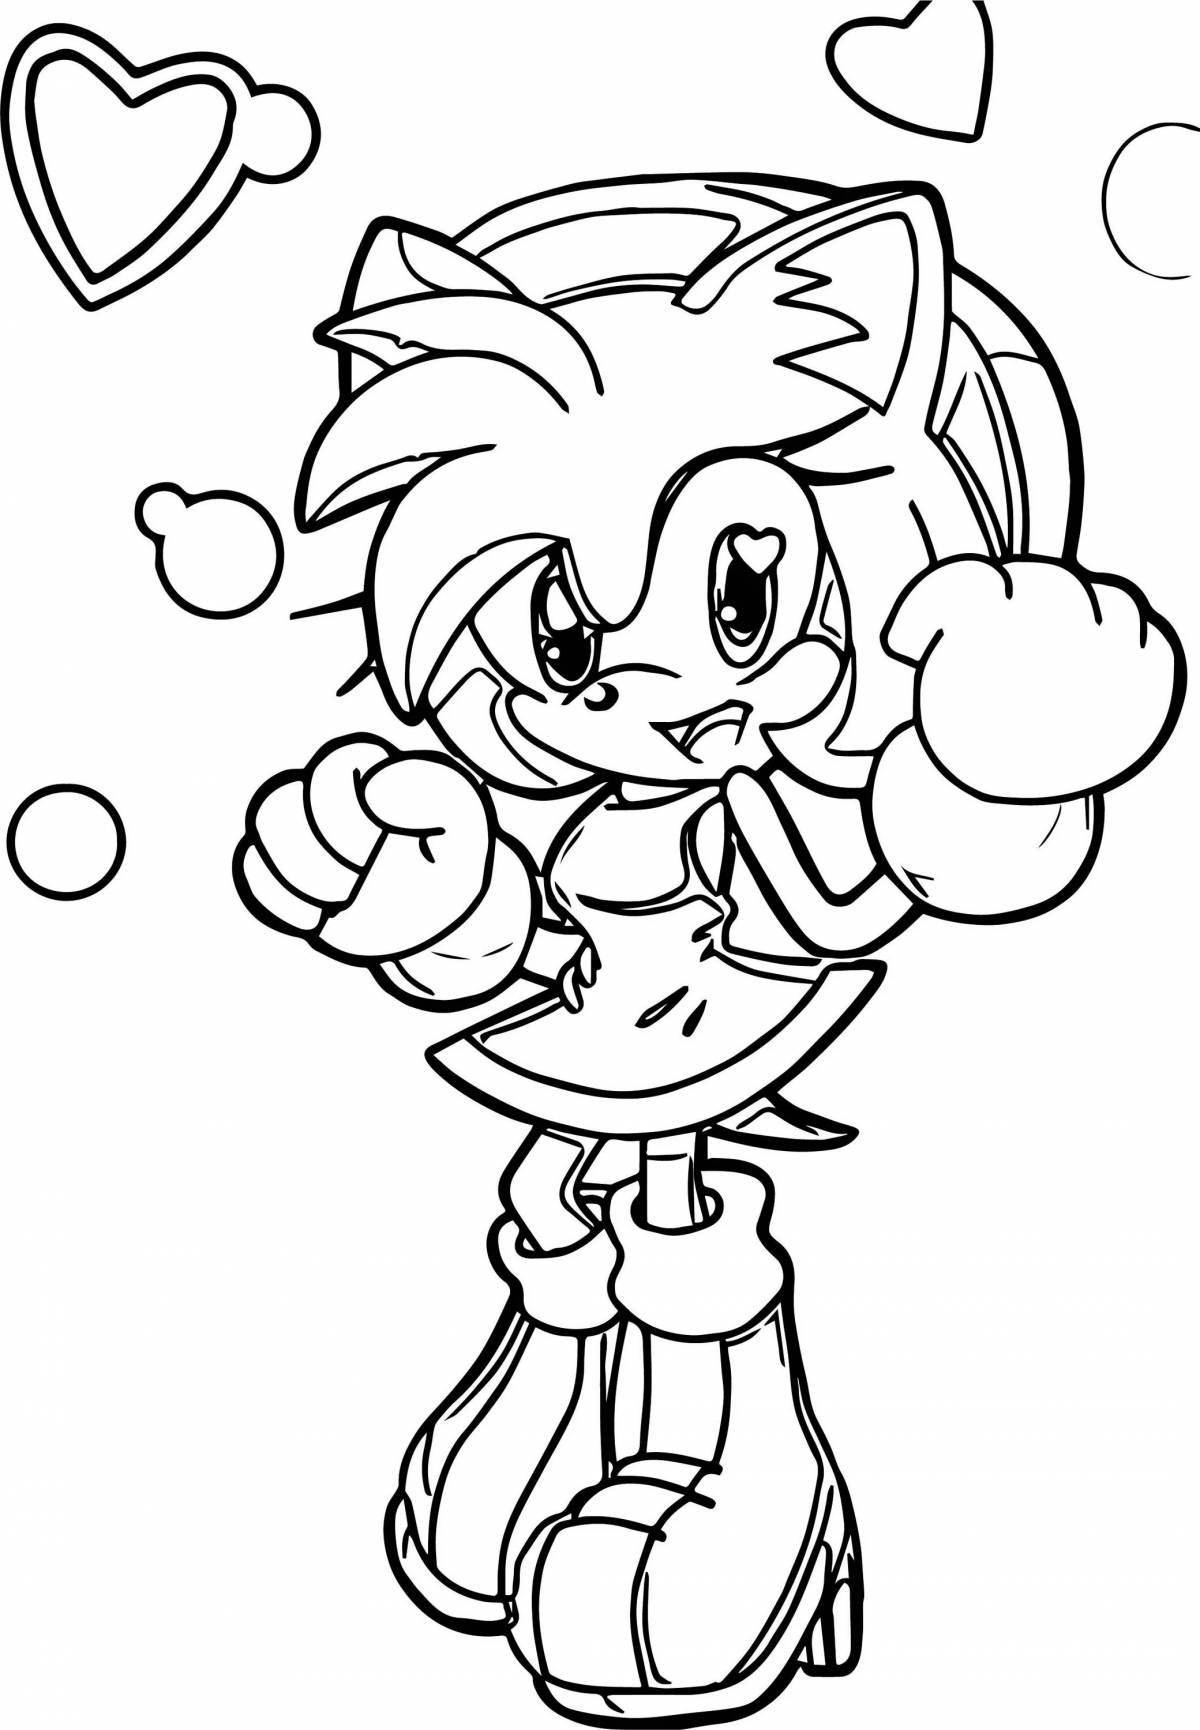 Sonic and amy rose live coloring